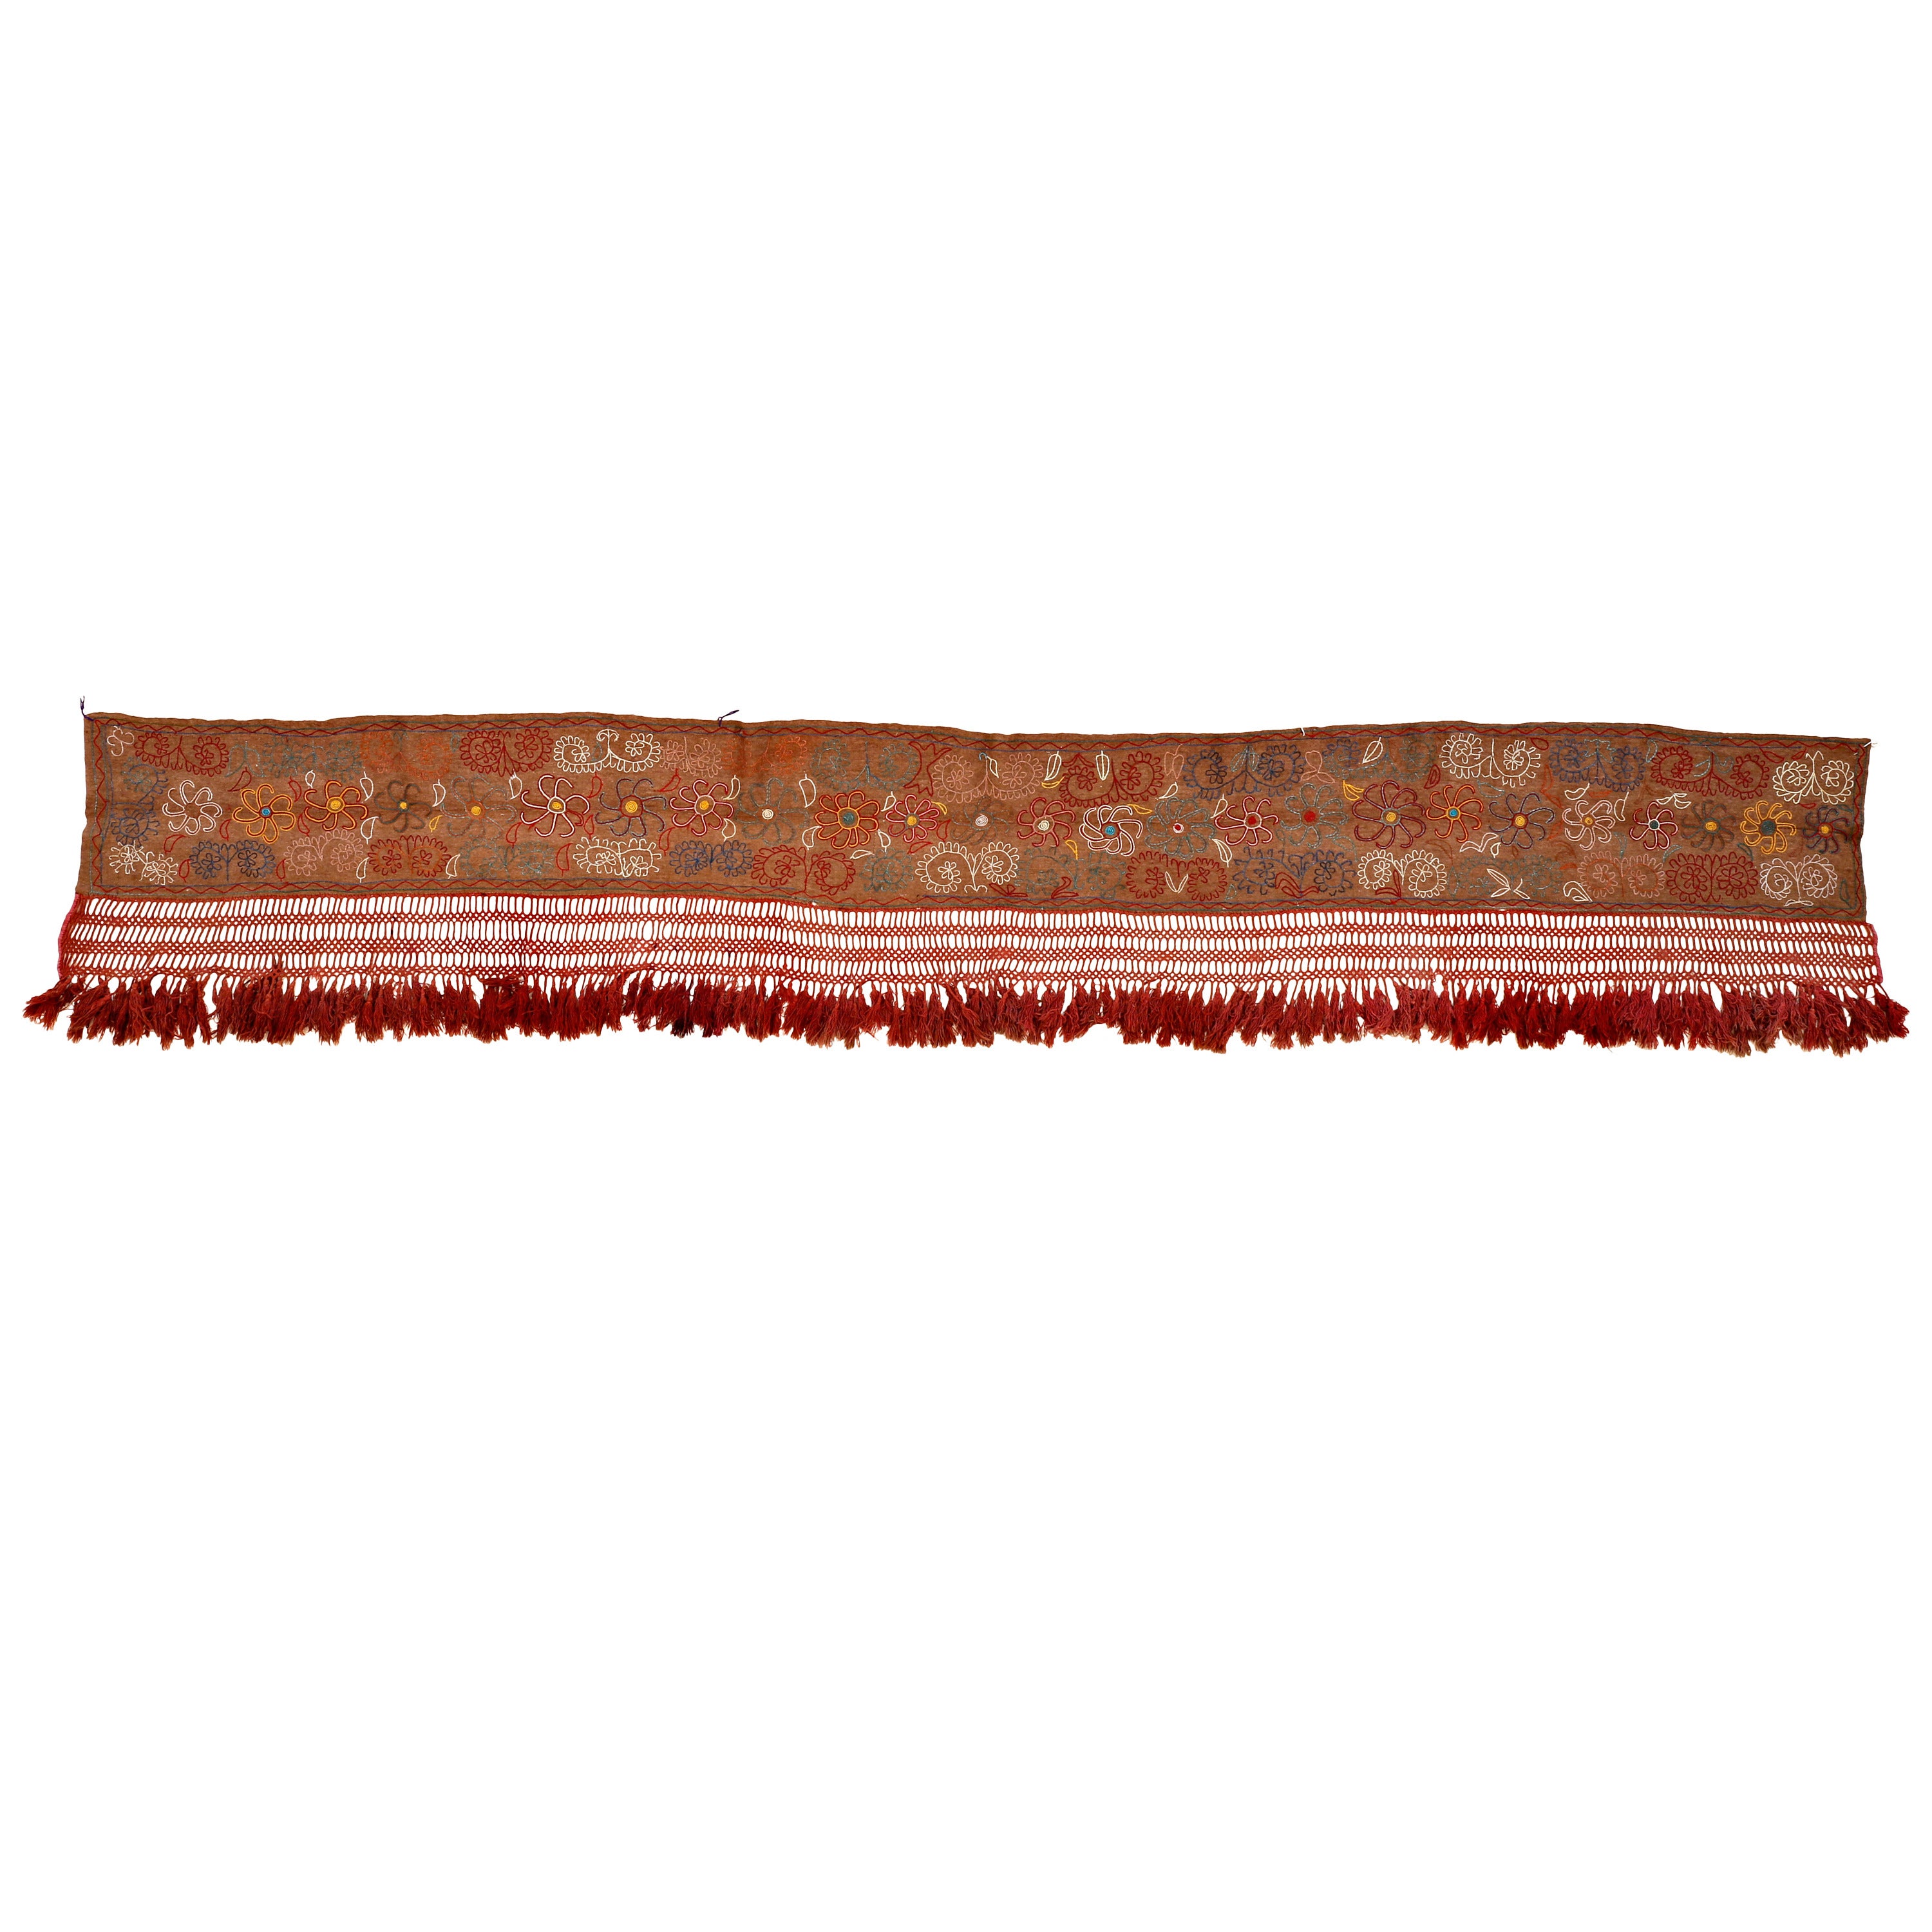 Kirghiz Embroidered Tent Band